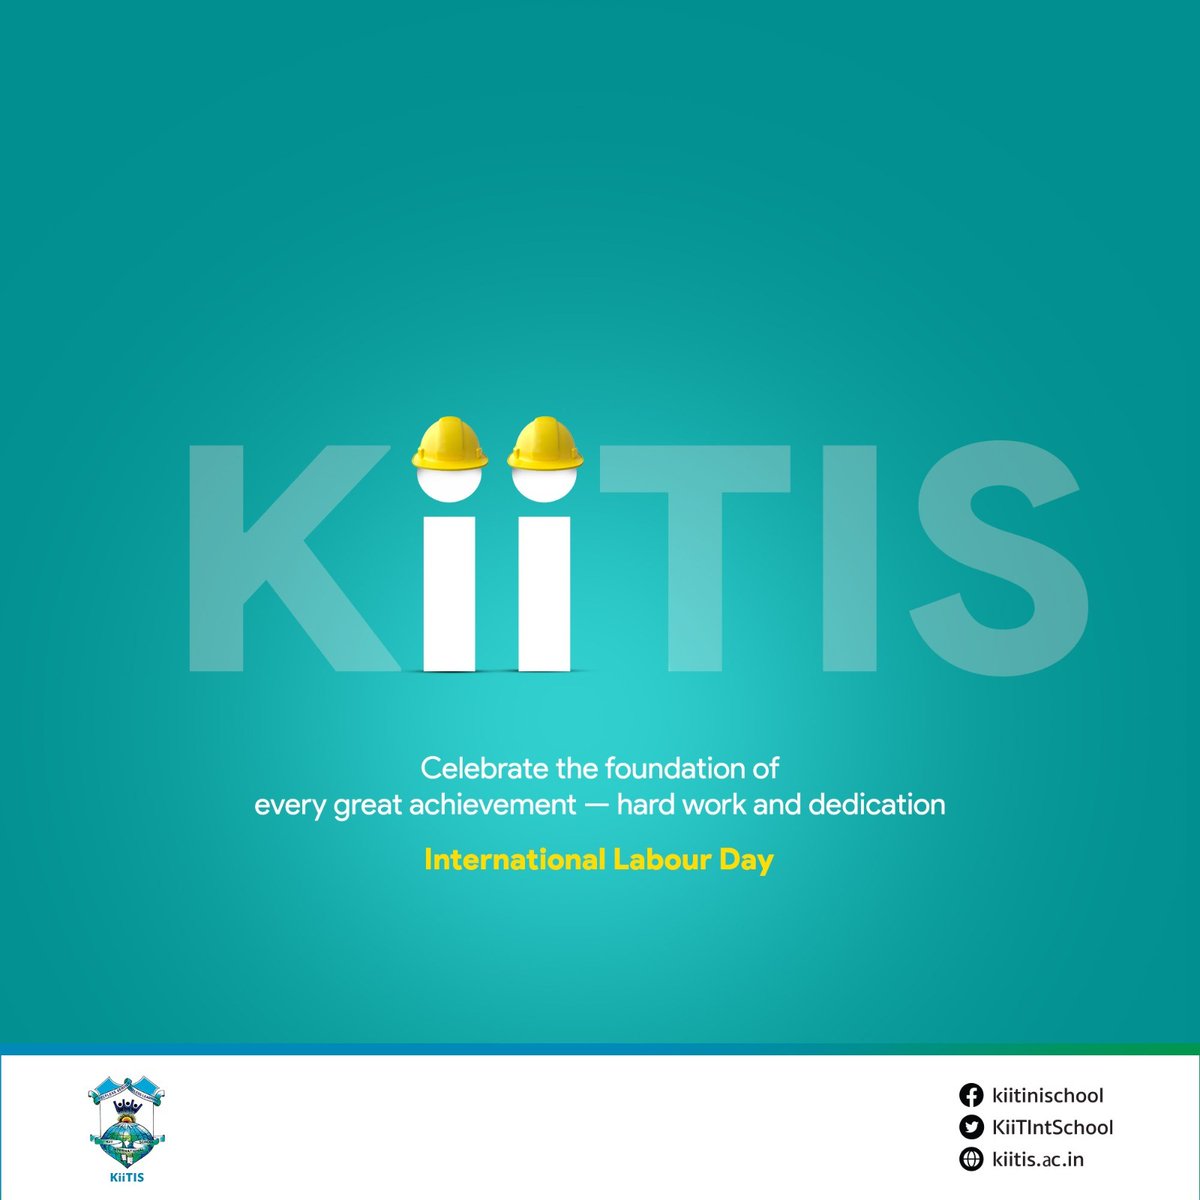 This International Labour Day, we celebrate the hard work and dedication.

Let's honour every worker's contribution today and every day.

#InternationalLabourDay #CelebrateHardWork #KiiTIS #EducationEmpowers